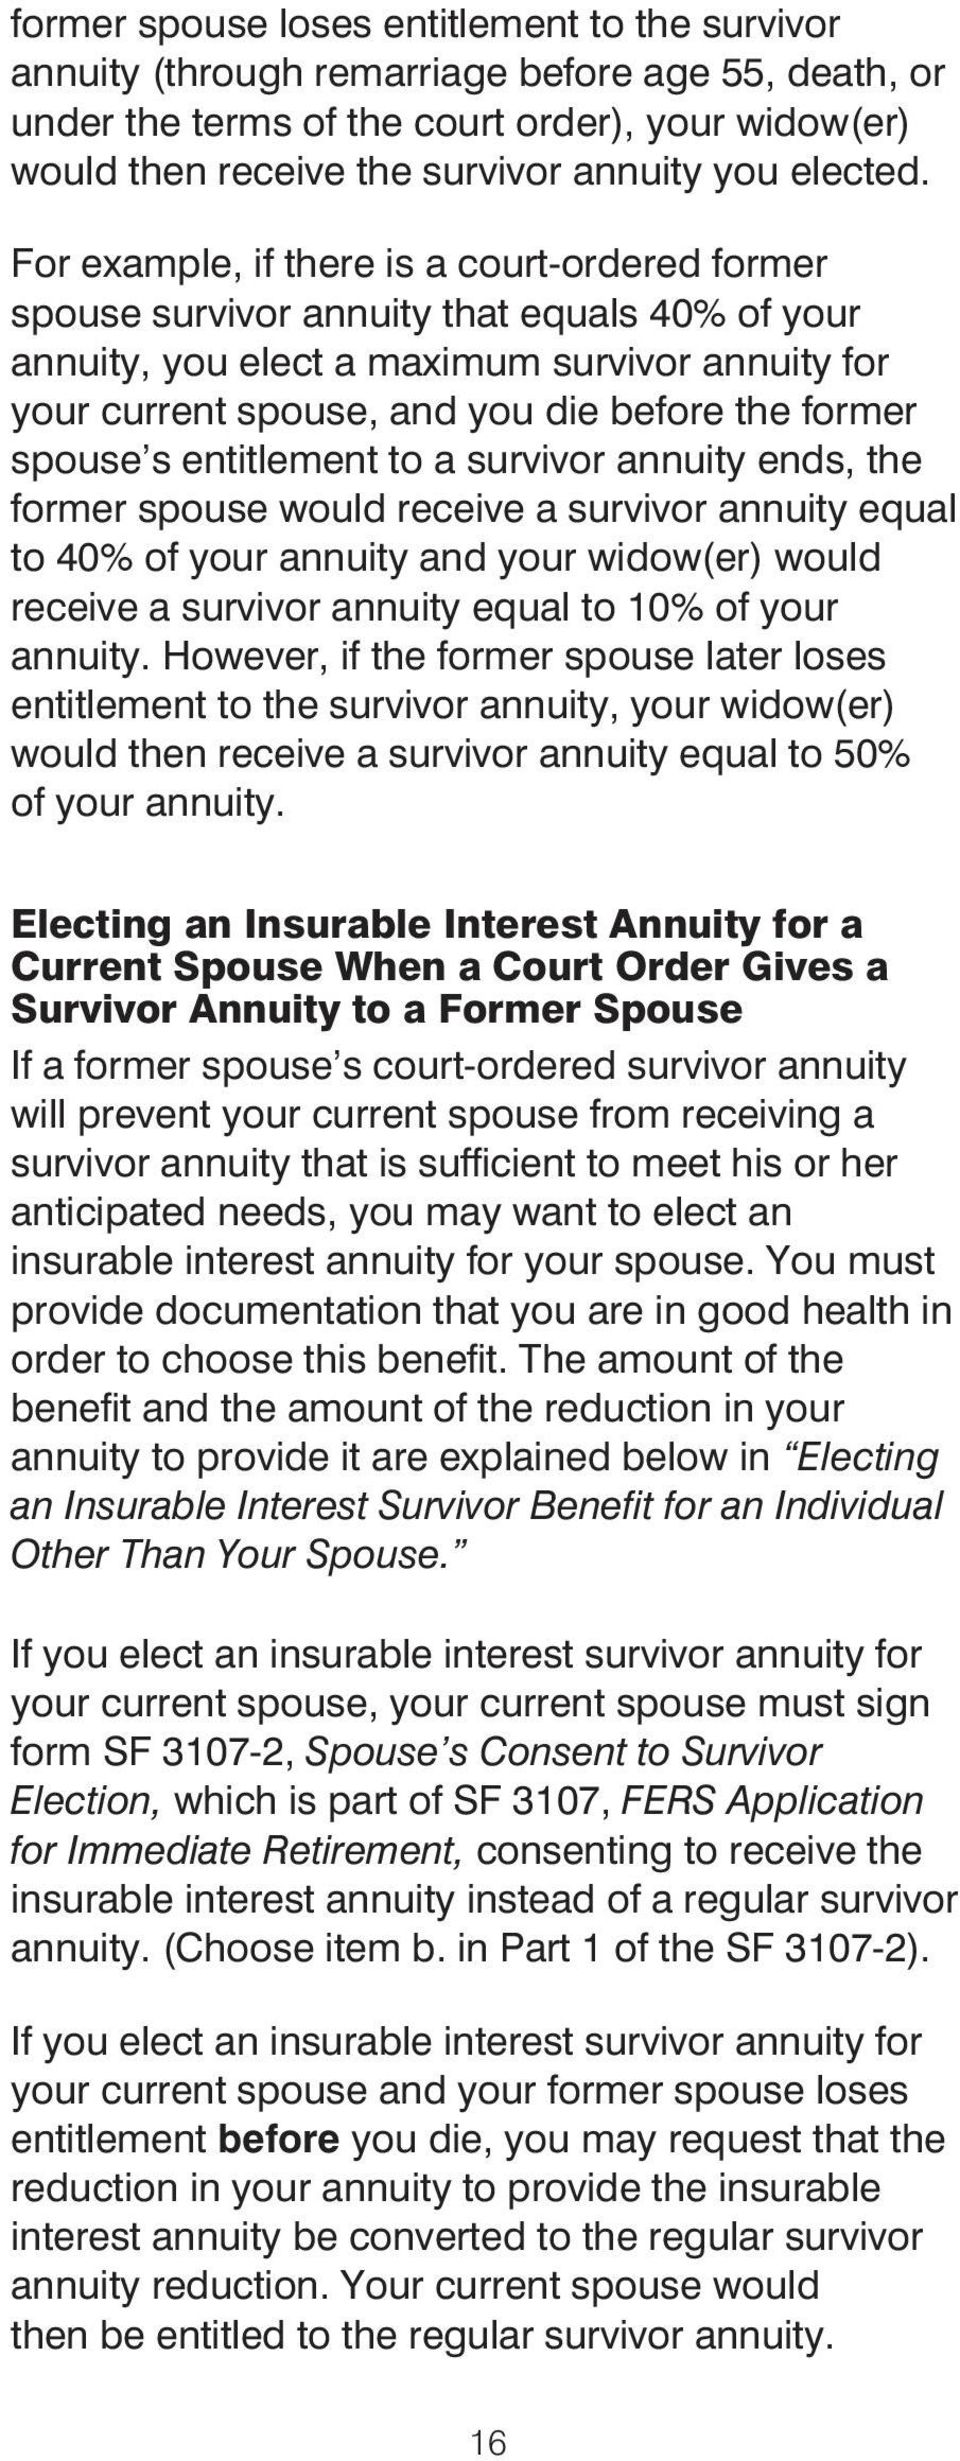 For example, if there is a court-ordered former spouse survivor annuity that equals 40% of your annuity, you elect a maximum survivor annuity for your current spouse, and you die before the former